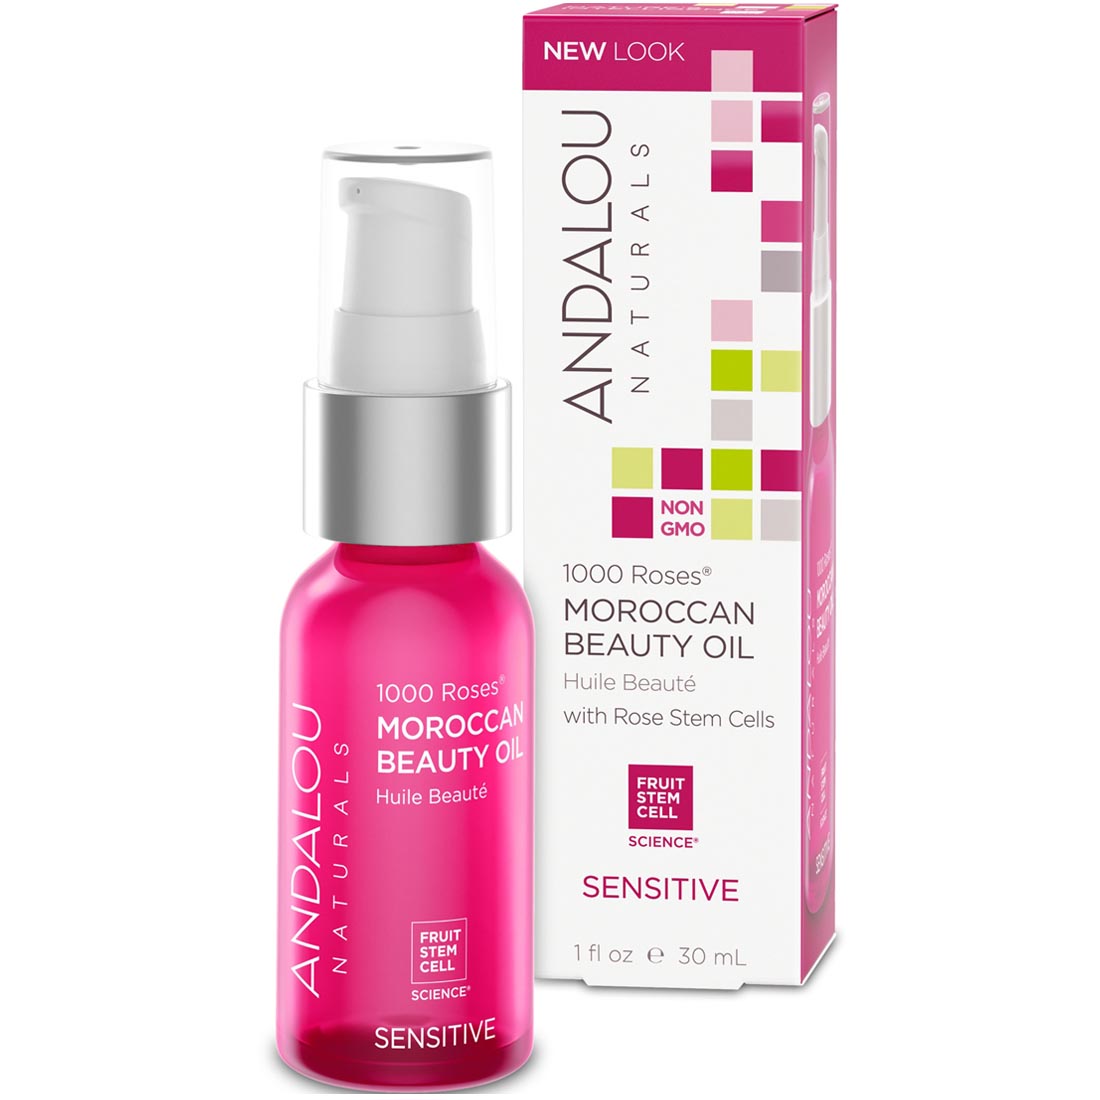 Andalou Naturals 1000 Roses Moroccan Beauty Oil, Senistive, 30ml